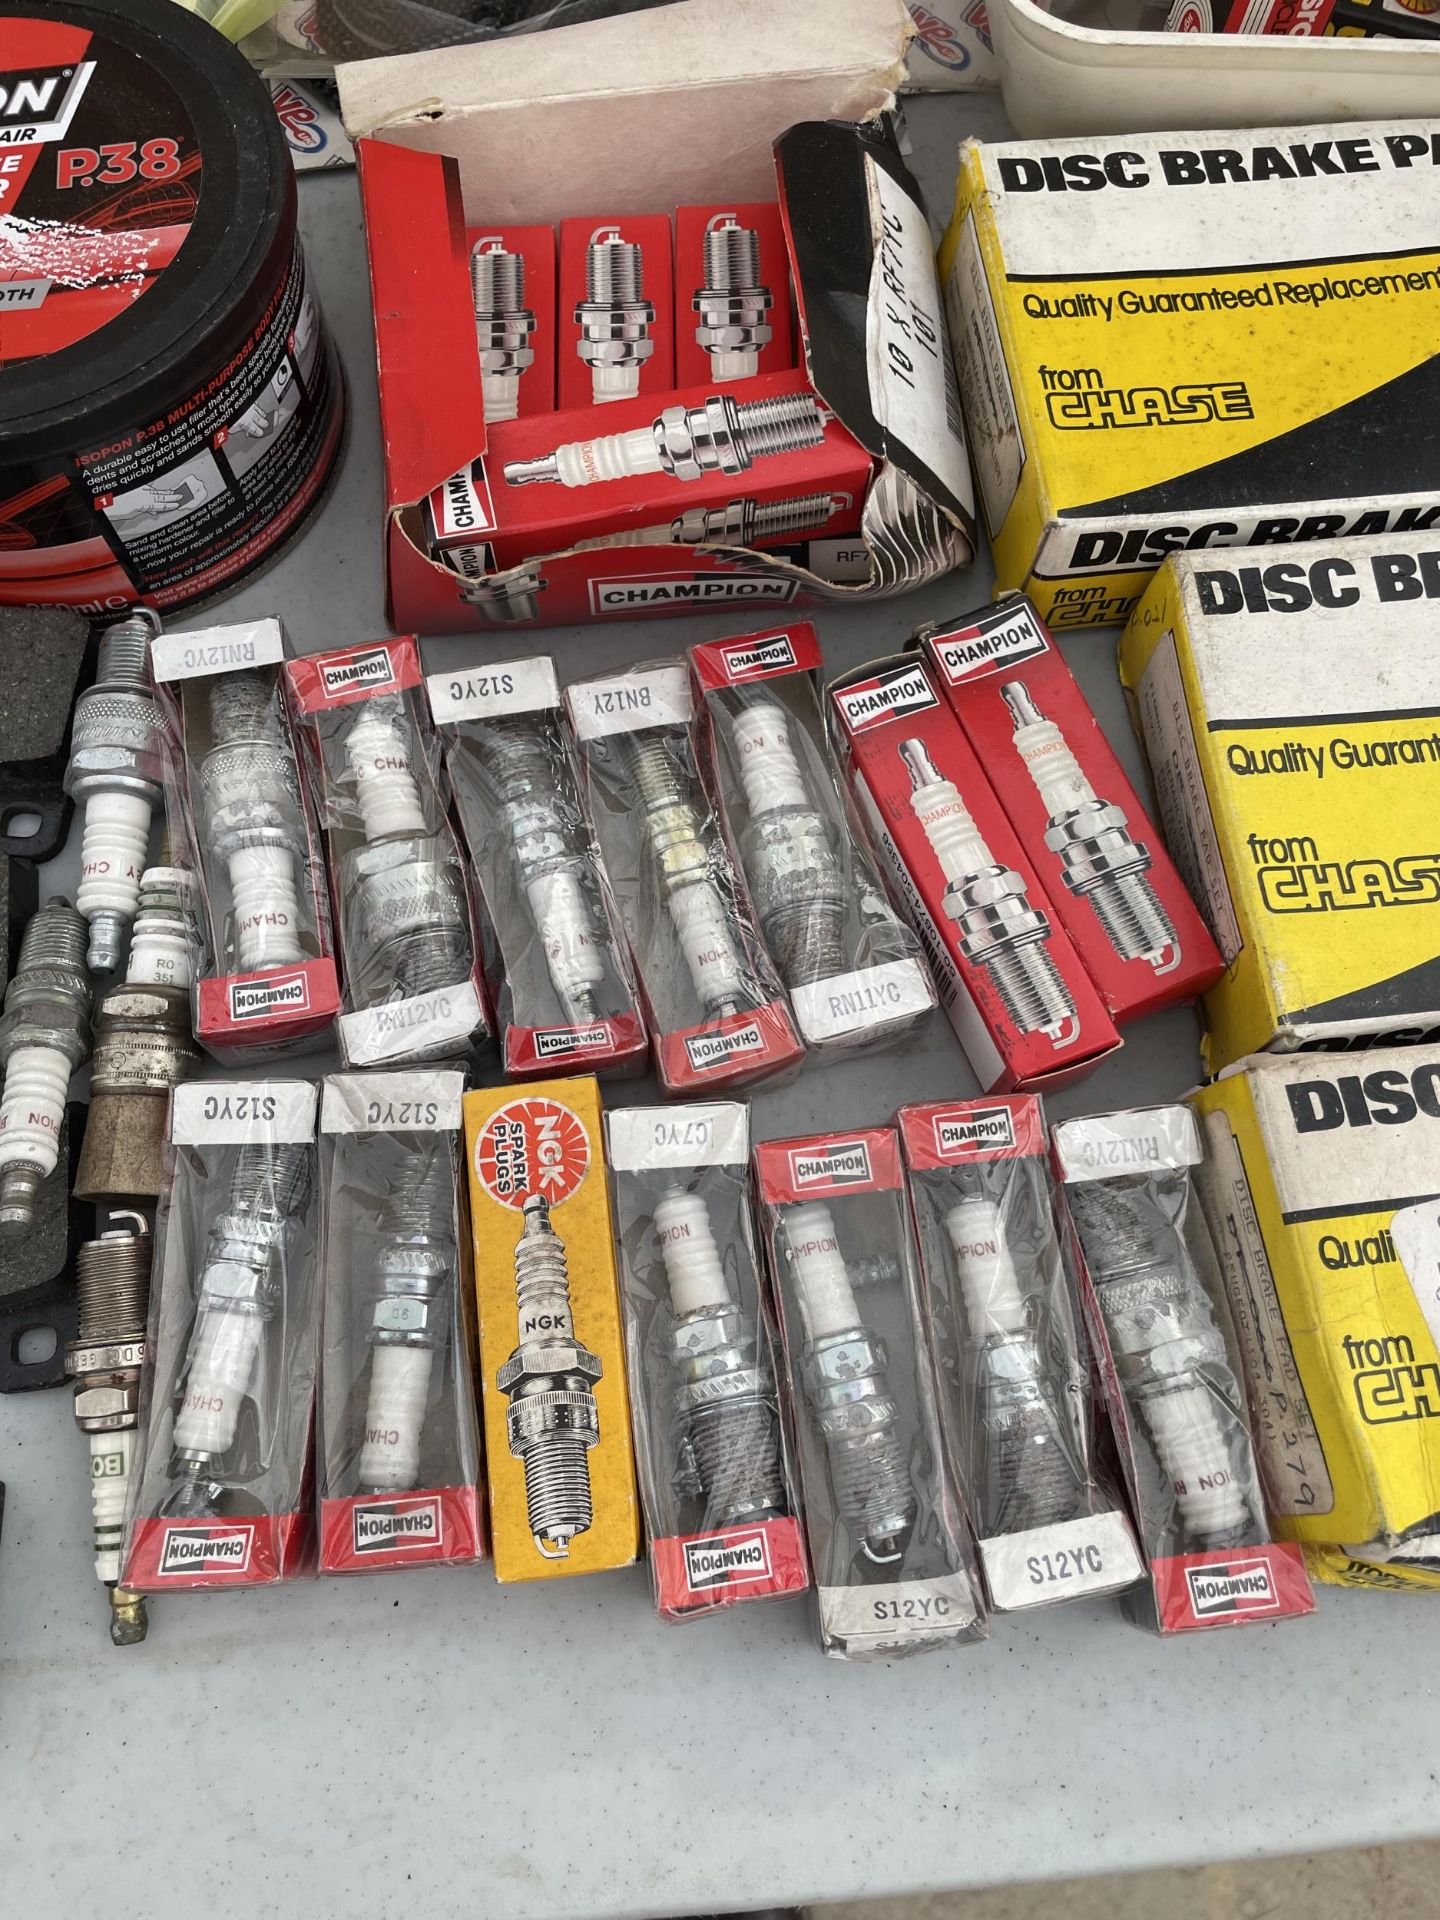 A COLLECTION OF VINTAGE AUTOMOBILE PARTS TO INCLUDE SPARK PLUGS, BRAKE PADS, ETC - Image 2 of 3